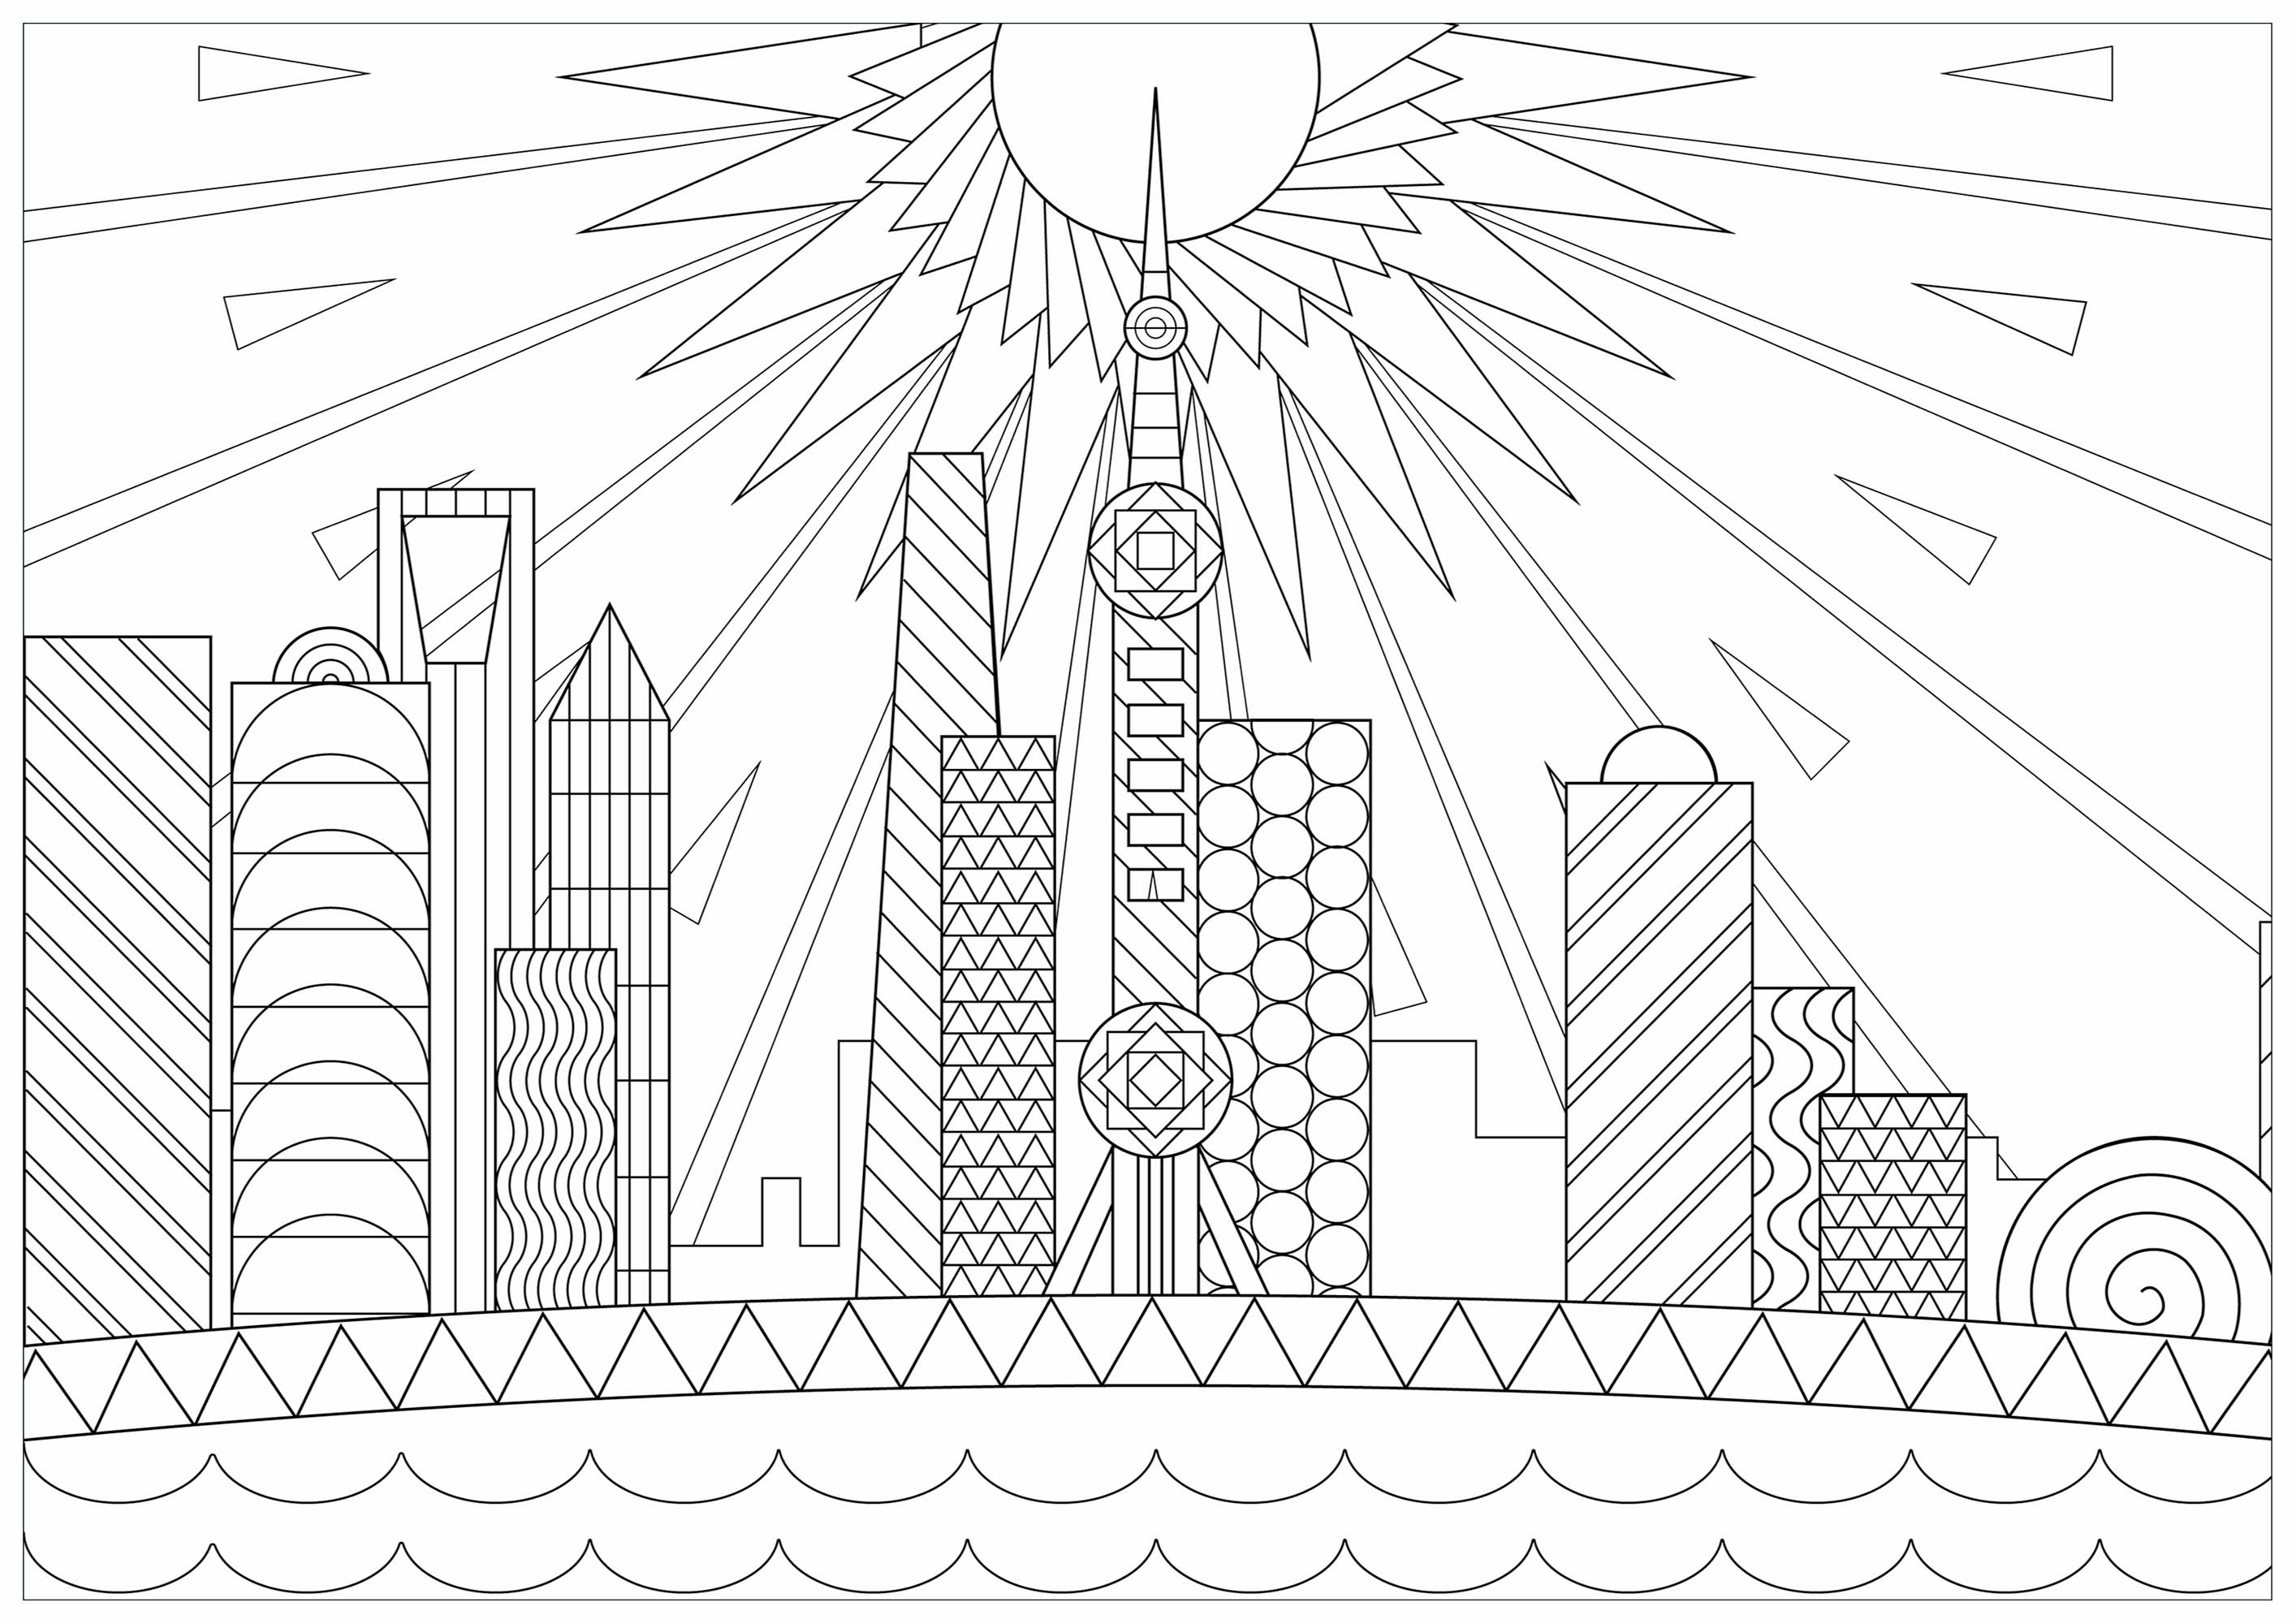 Skyline Coloring Pages Shanghai Buildings Lscapes Adult Coloring Pages